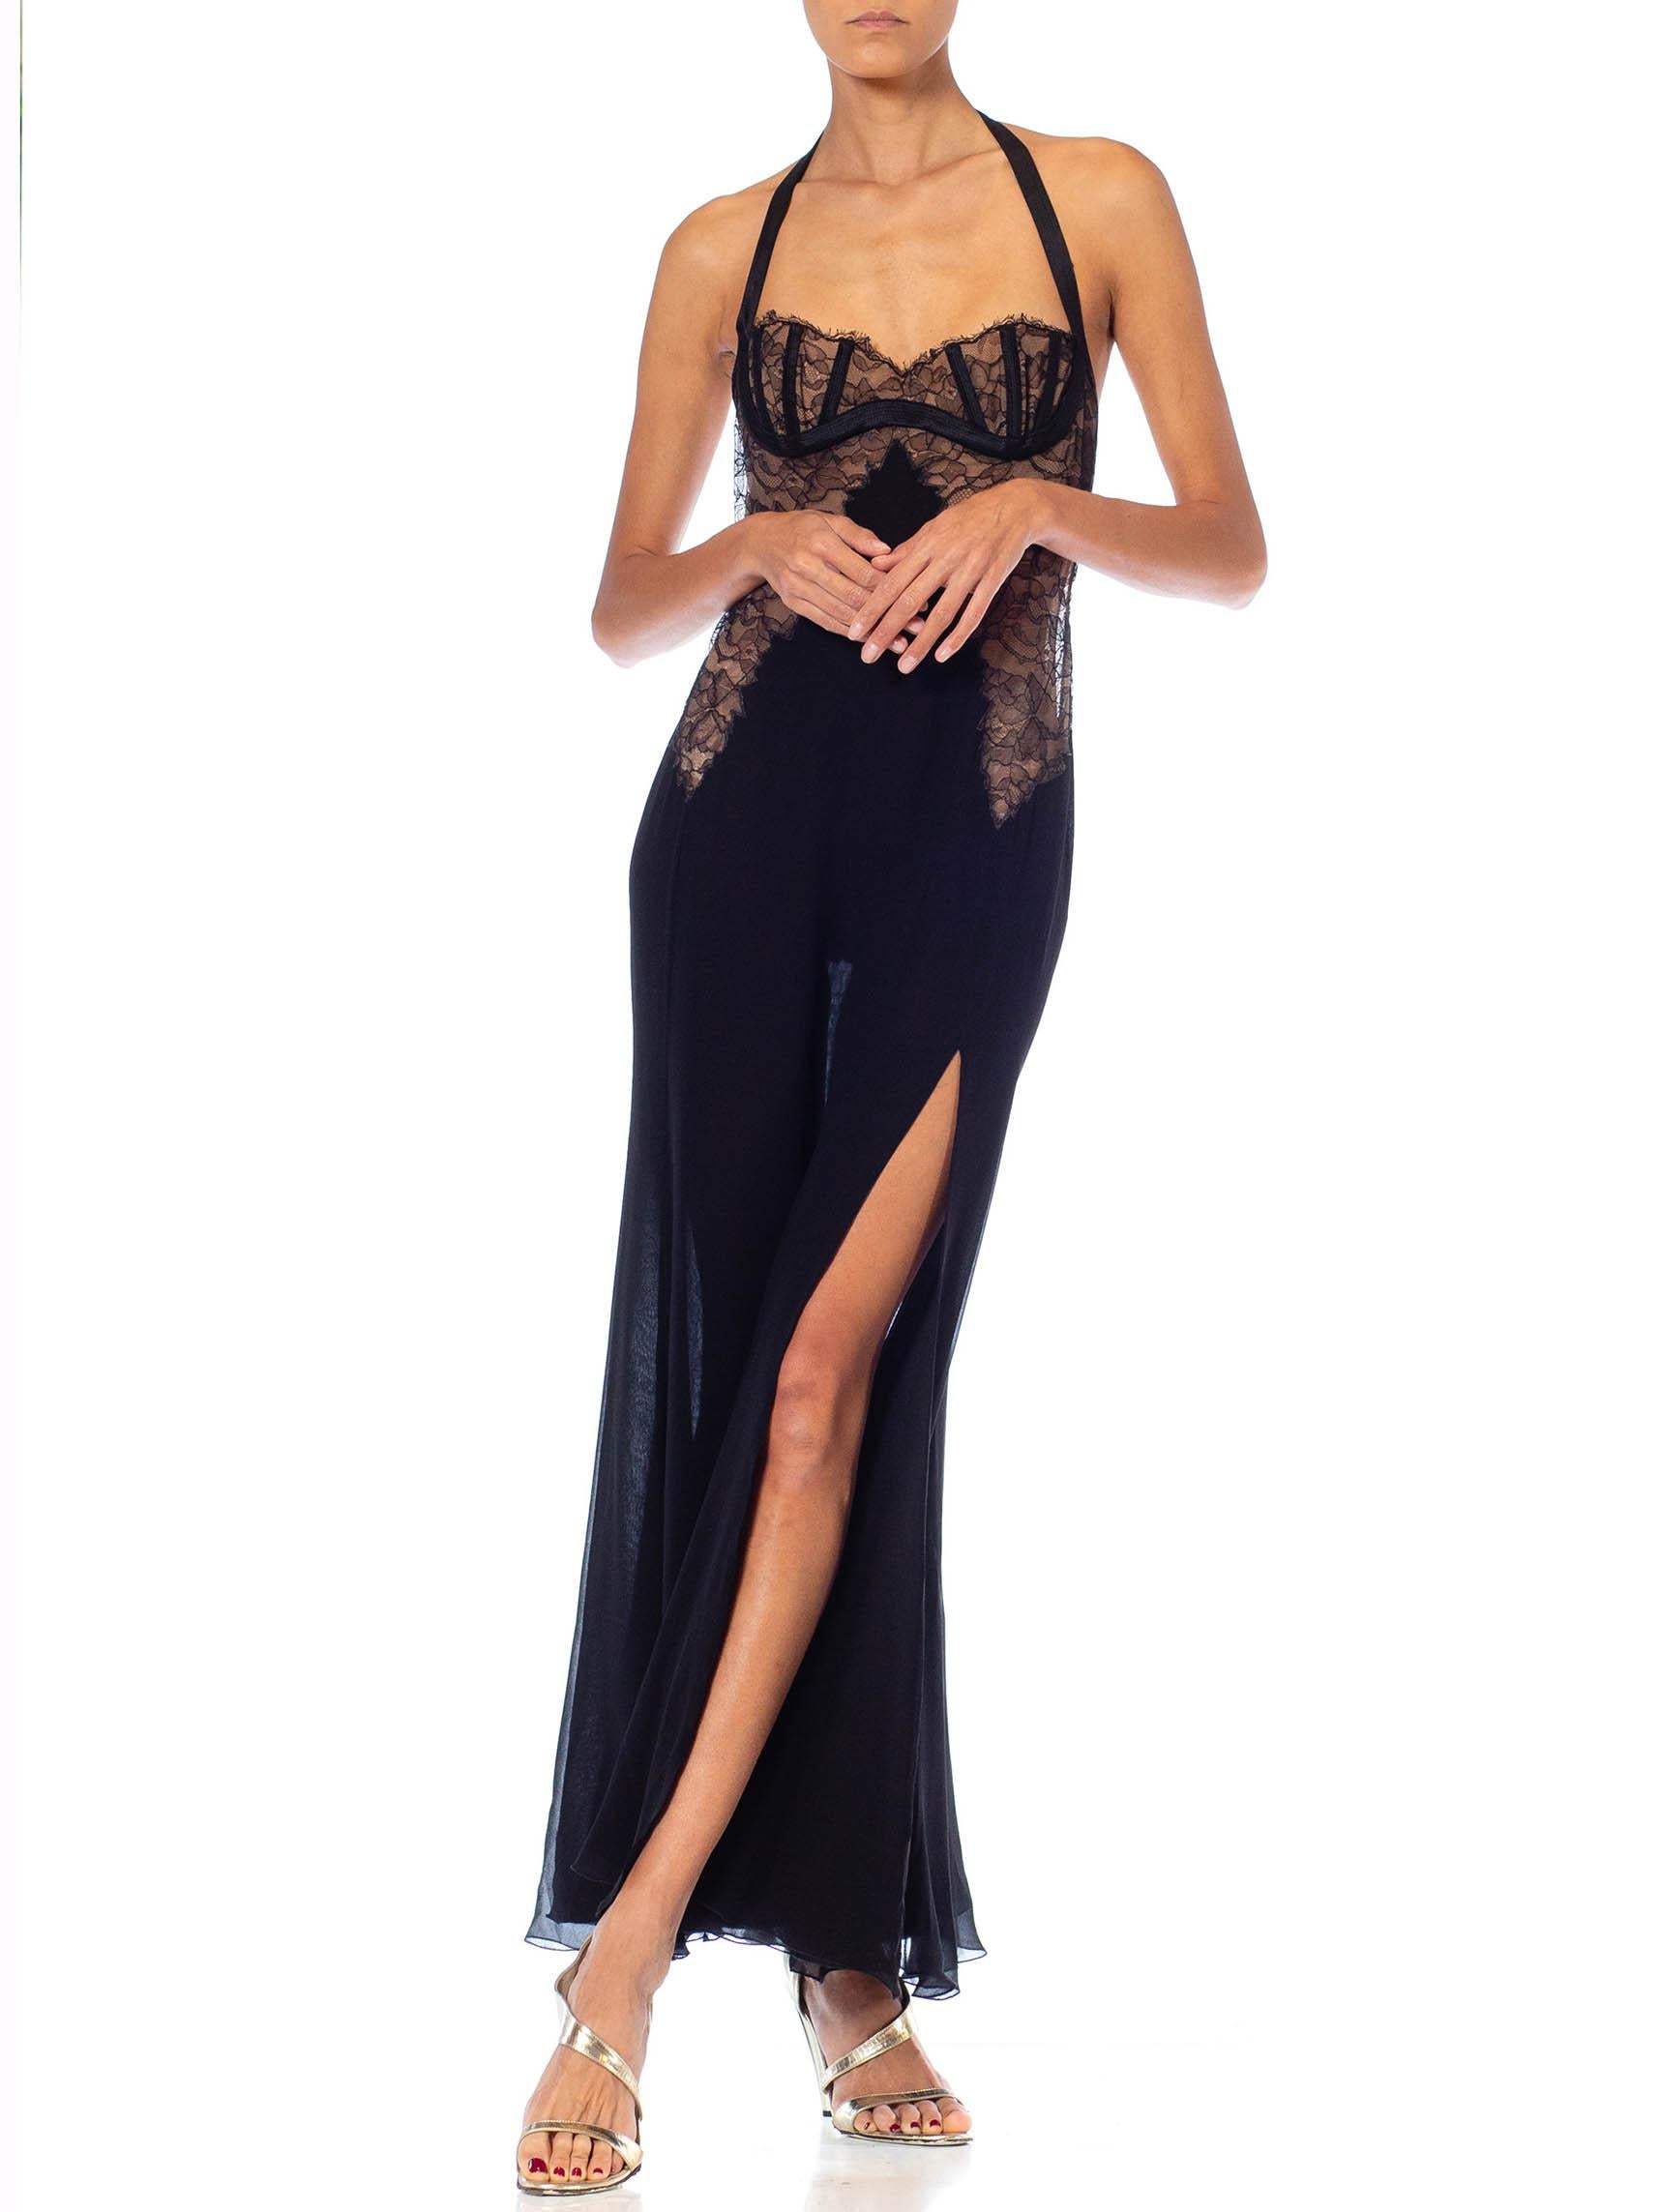 1990S Gianni Versace Black Silk Chiffon & Lace Lingerie Gown With High Slit 3